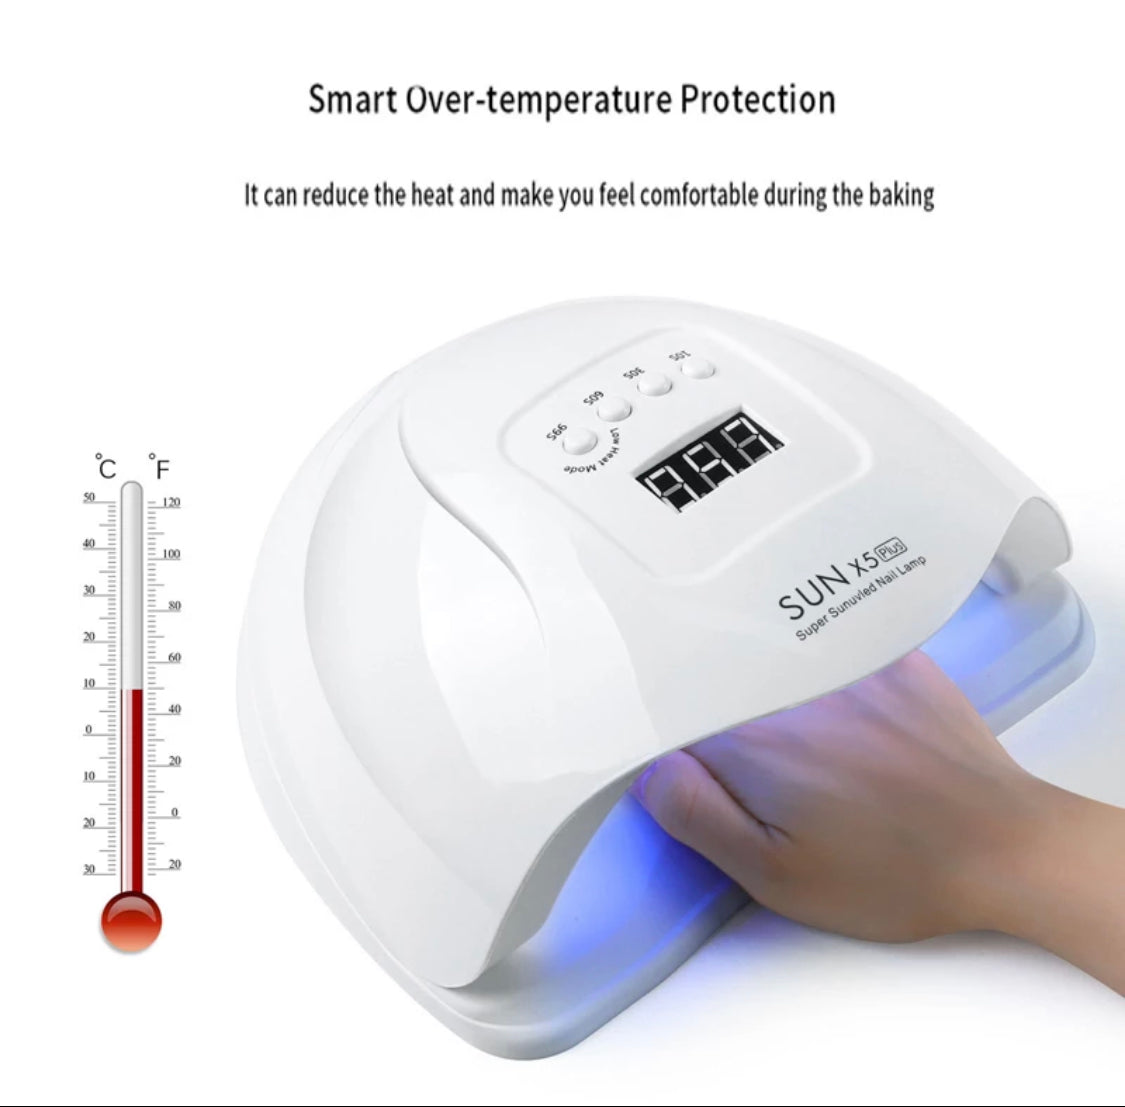 Powerful UV LED Nail Dryer with Portable Design